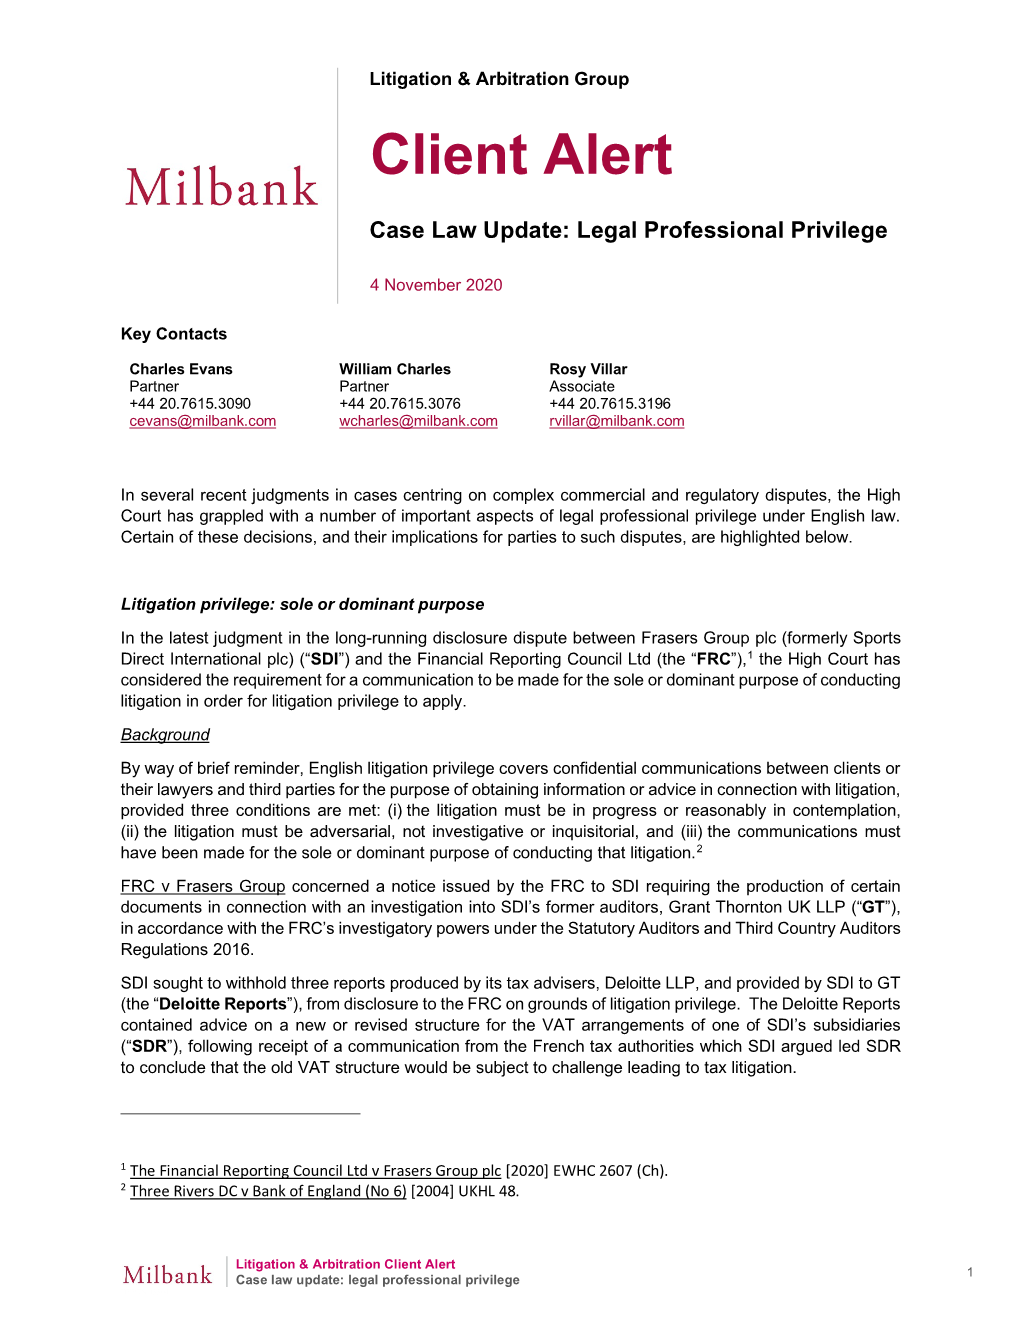 For the Full Case Law Update Legal Professional Privilege Client Alert Click Here